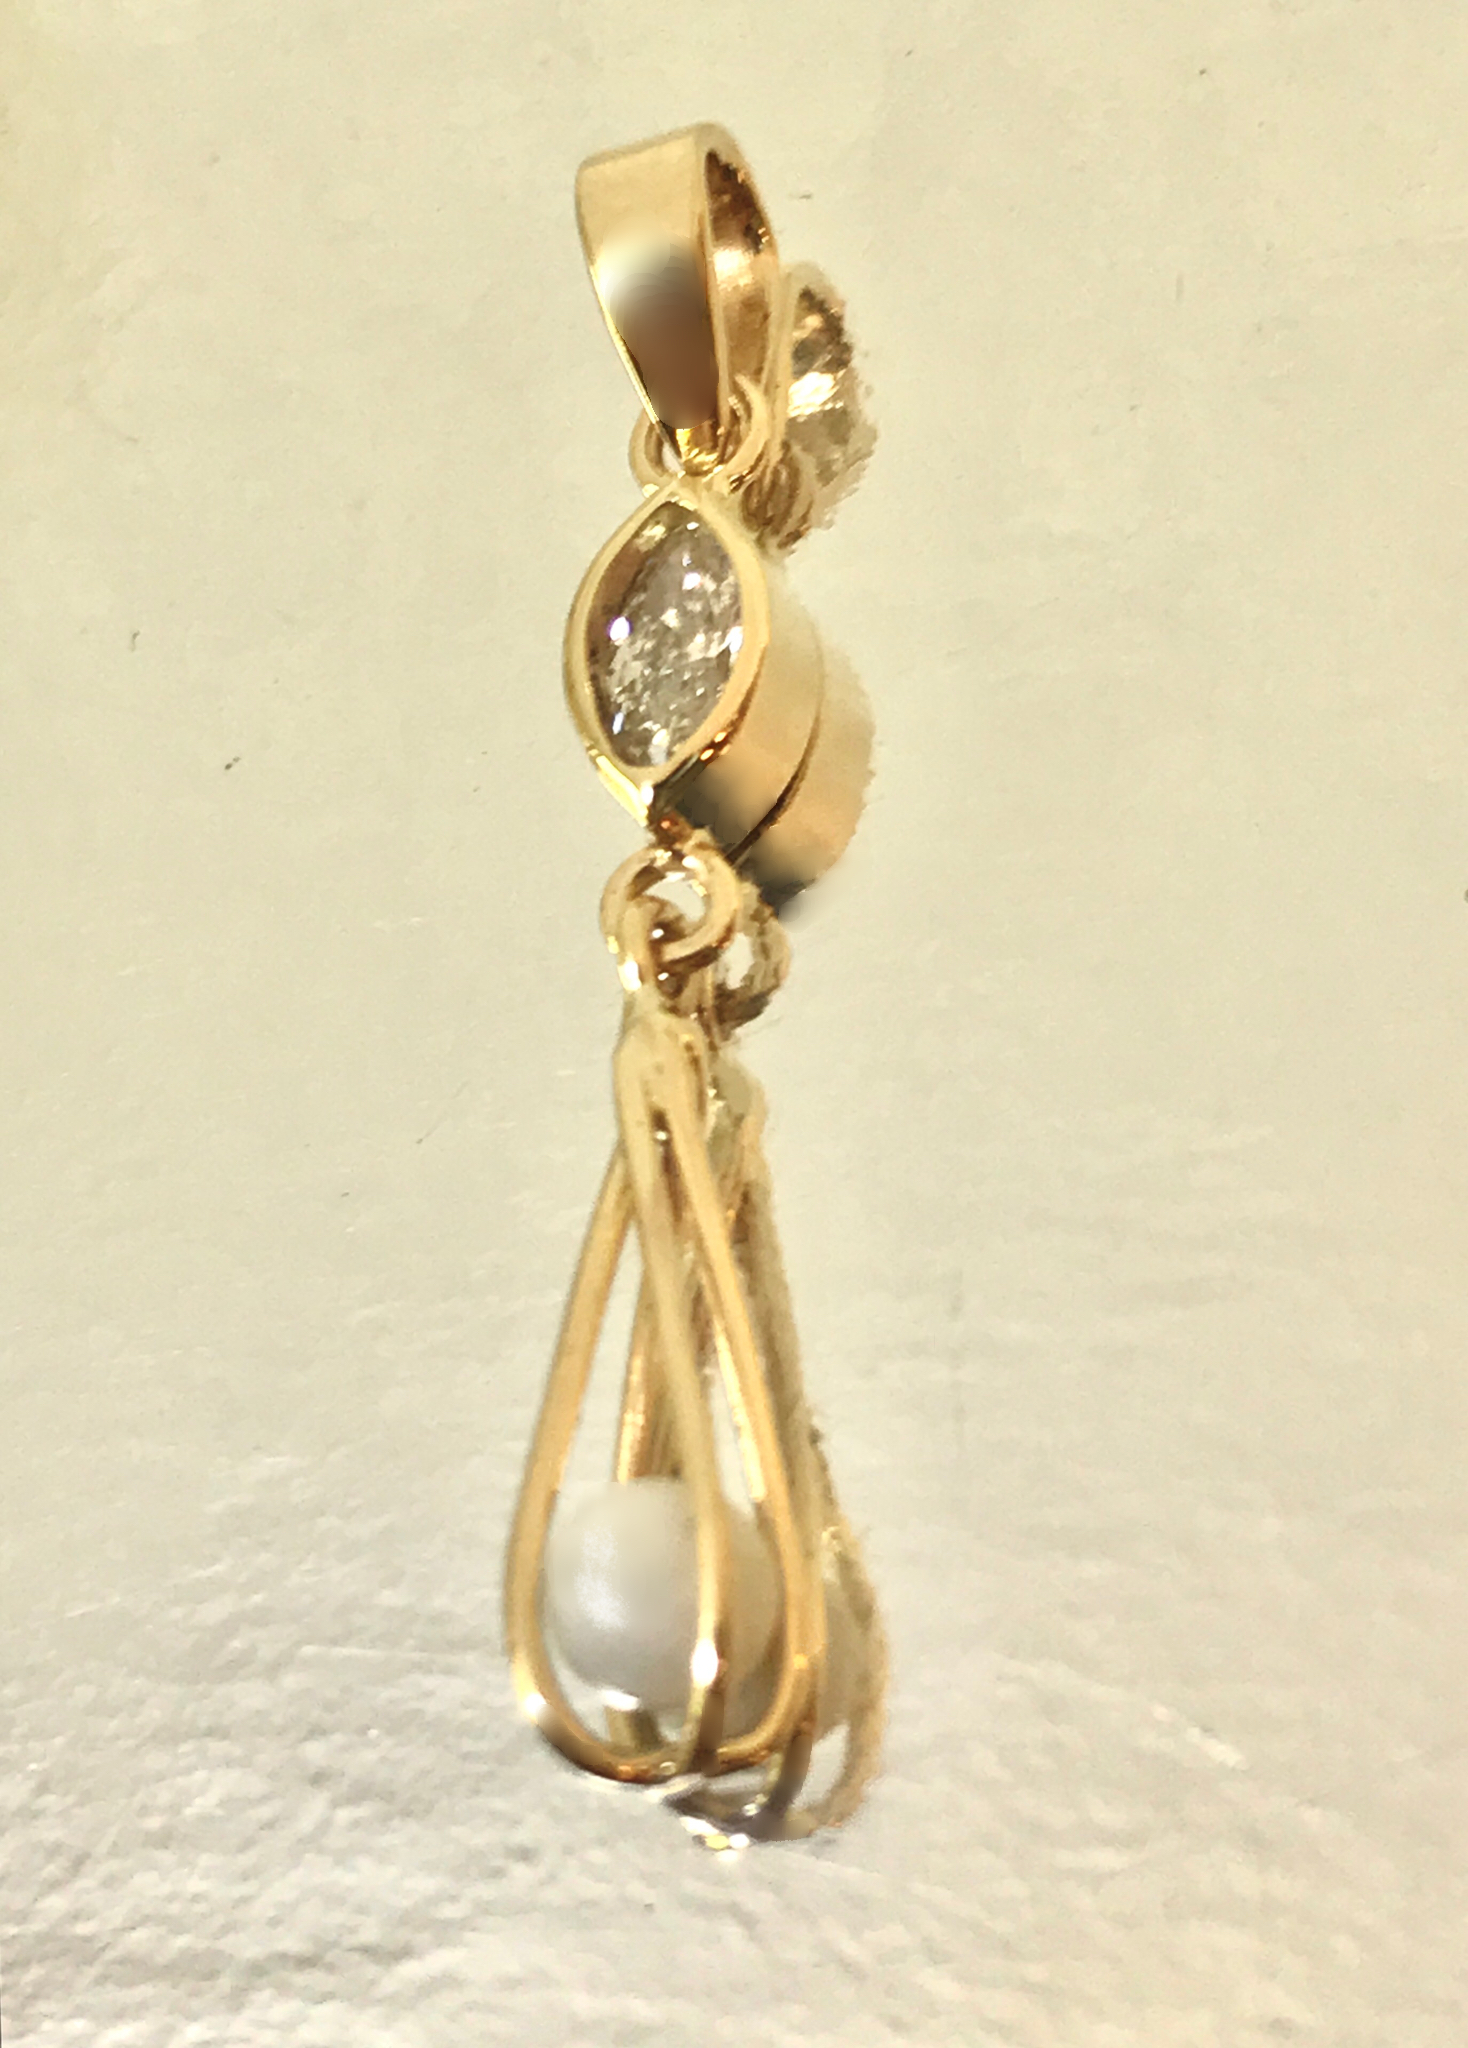 14 Kt Yellow Gold Custom Designed Genuine Pearl Found Directly From An Oyster and Featured With A Bezel Set Marquise Cut Diamond To Make A Stunning Pendant